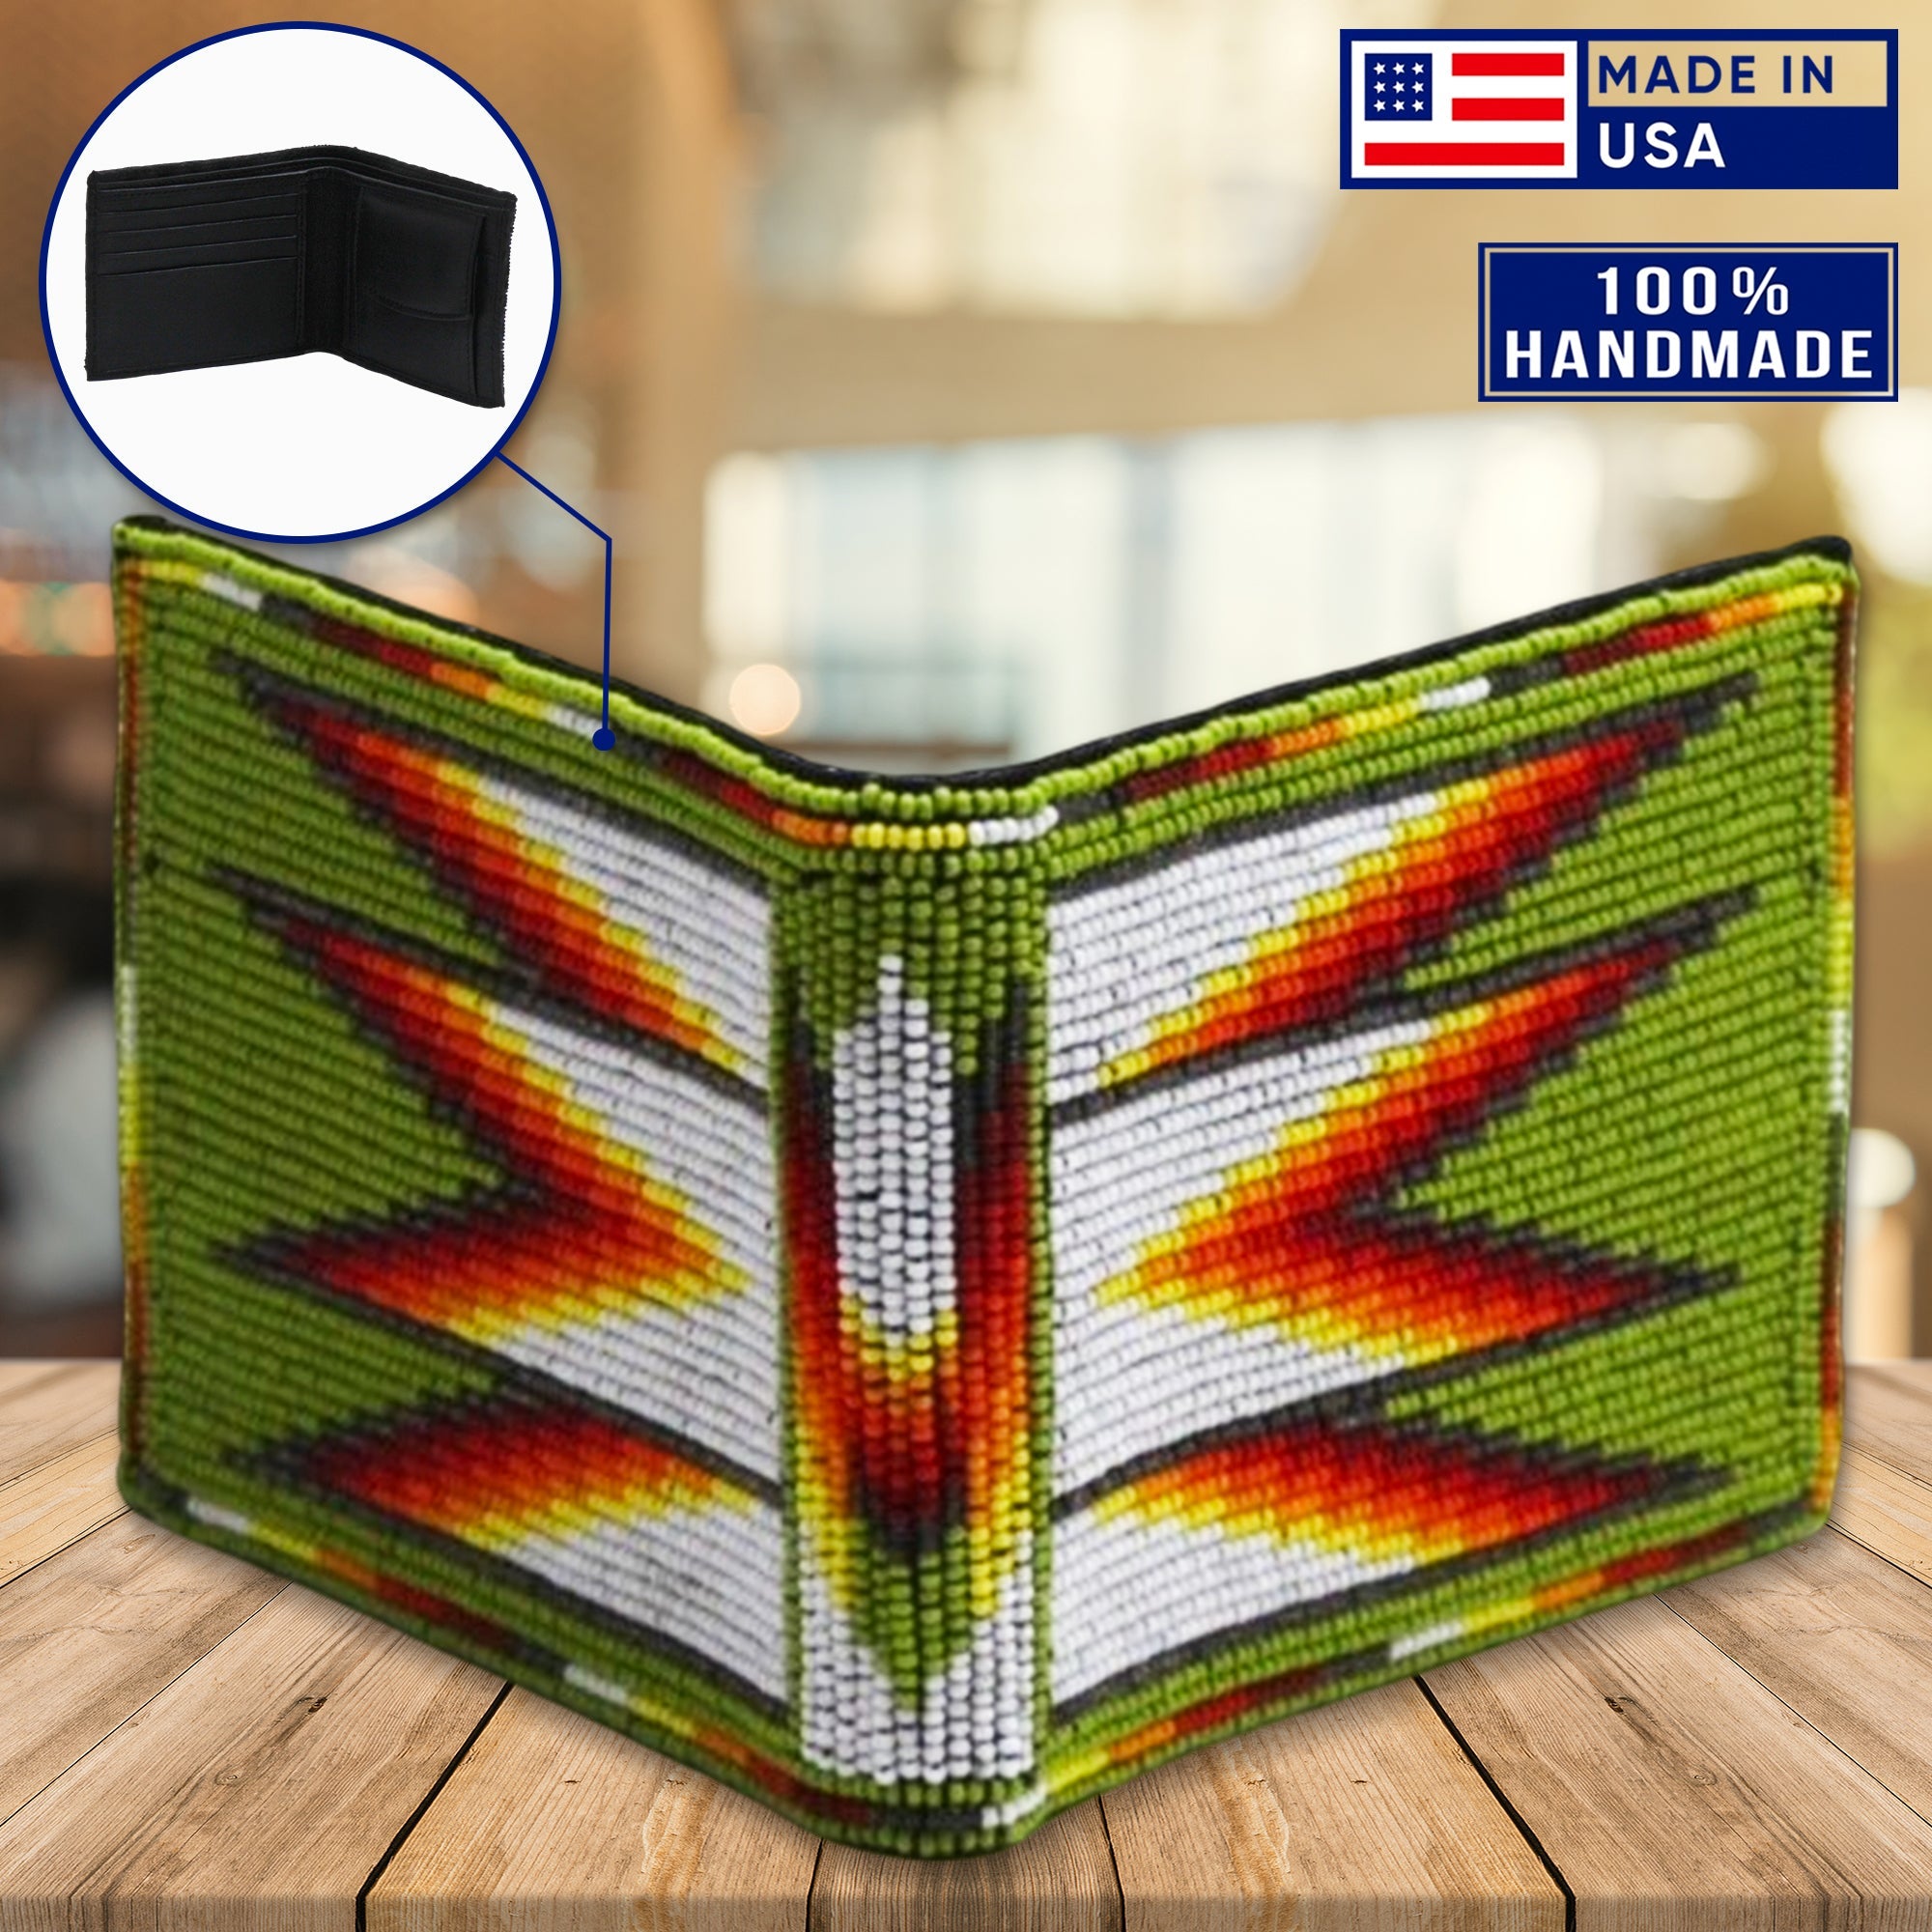 Handmade Beaded Olive Green Fire Native American style genuine leather Men’s bifold Wallet/Purse IBL